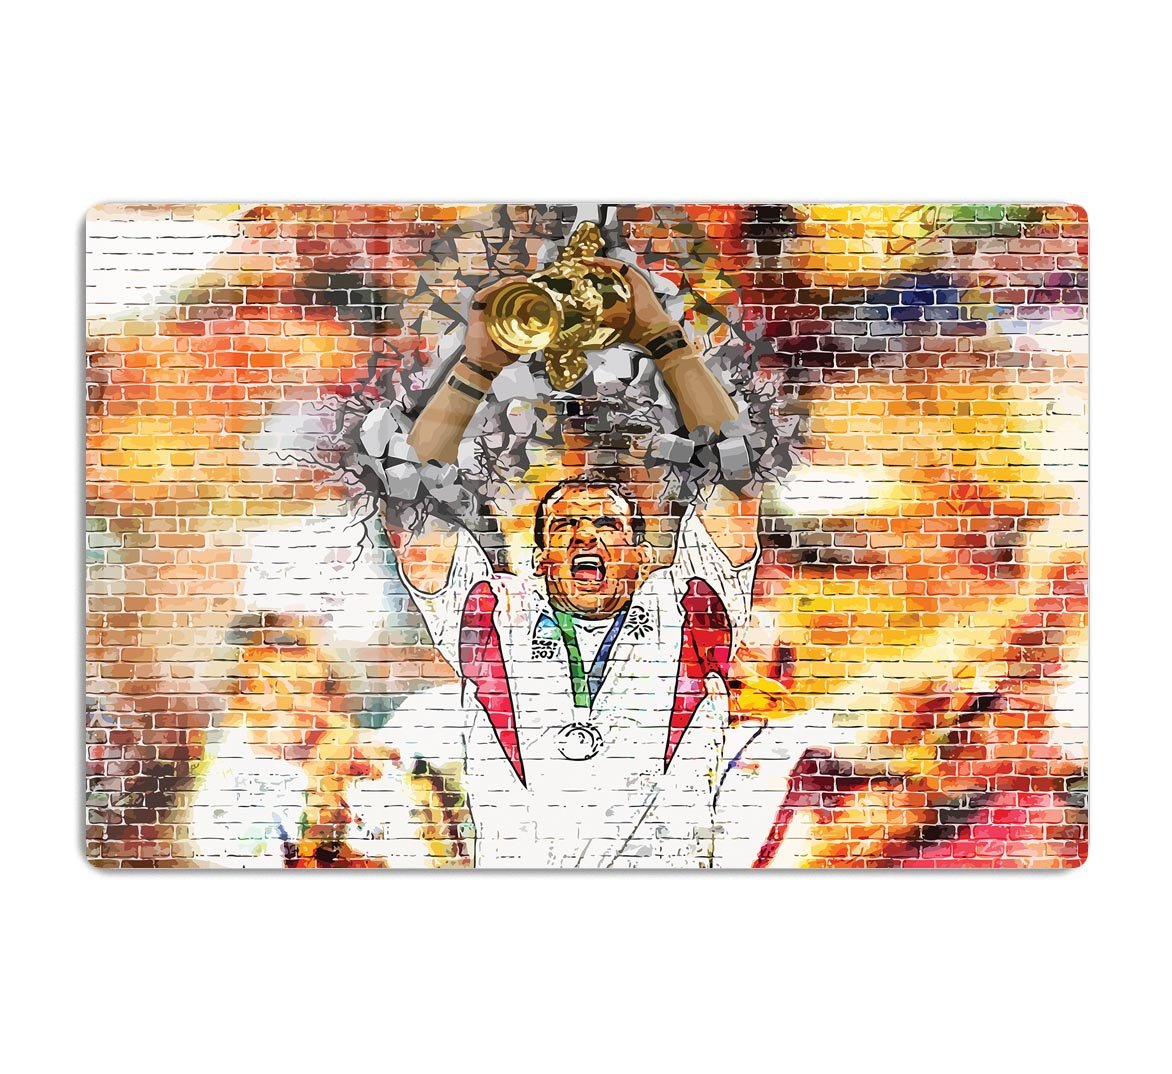 England Rugby World Cup Win 2003 HD Metal Print